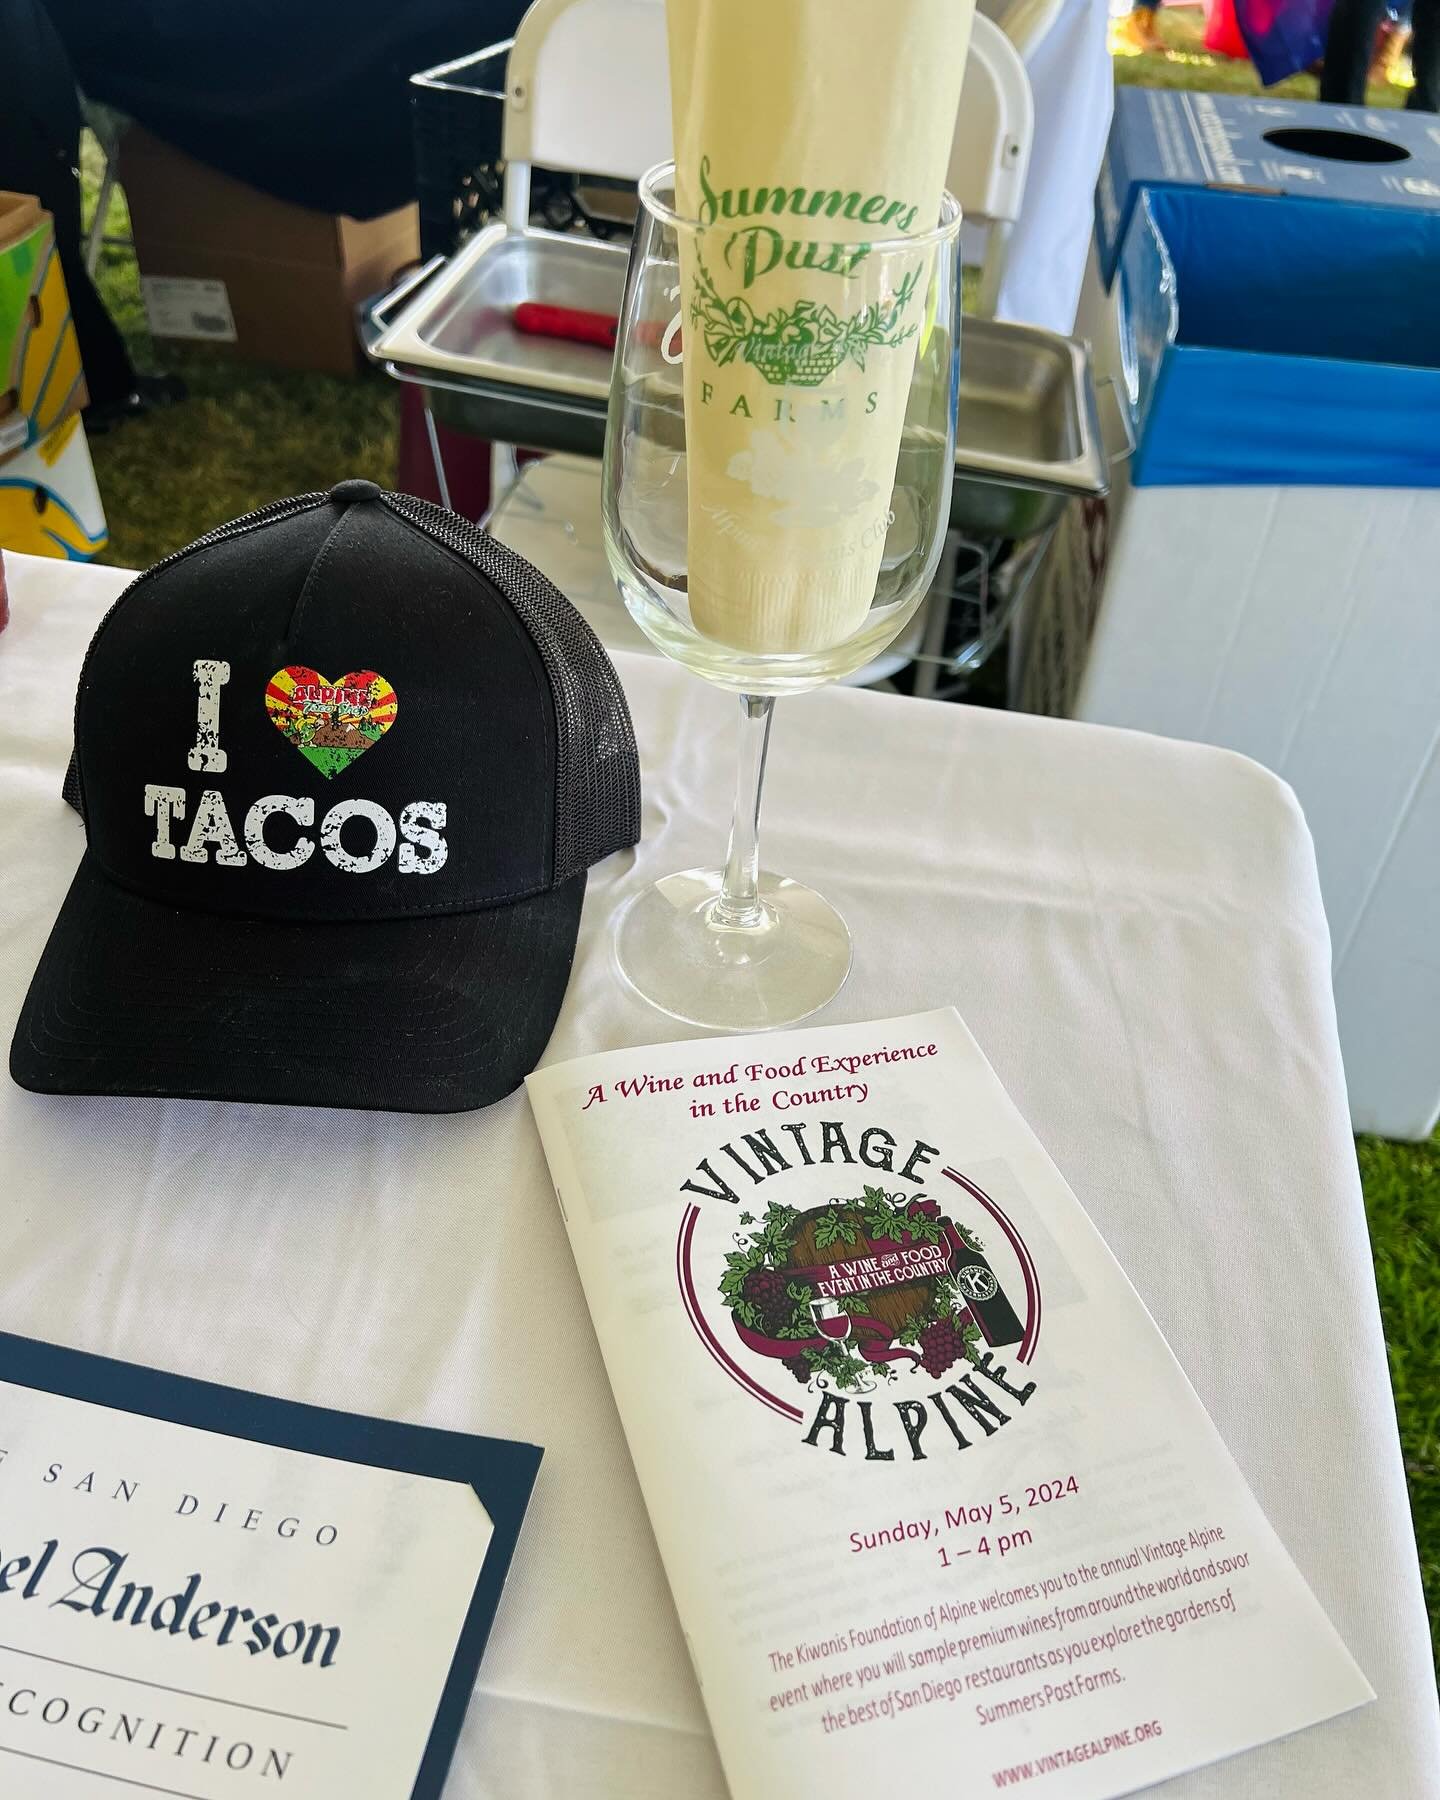 Beautiful Cinco de Mayo at @alpinekiwanis Vintage Alpine event. Serving up some delicious fajitas! If you didn&rsquo;t make it out here, the shop is open until 9! Don&rsquo;t cook!